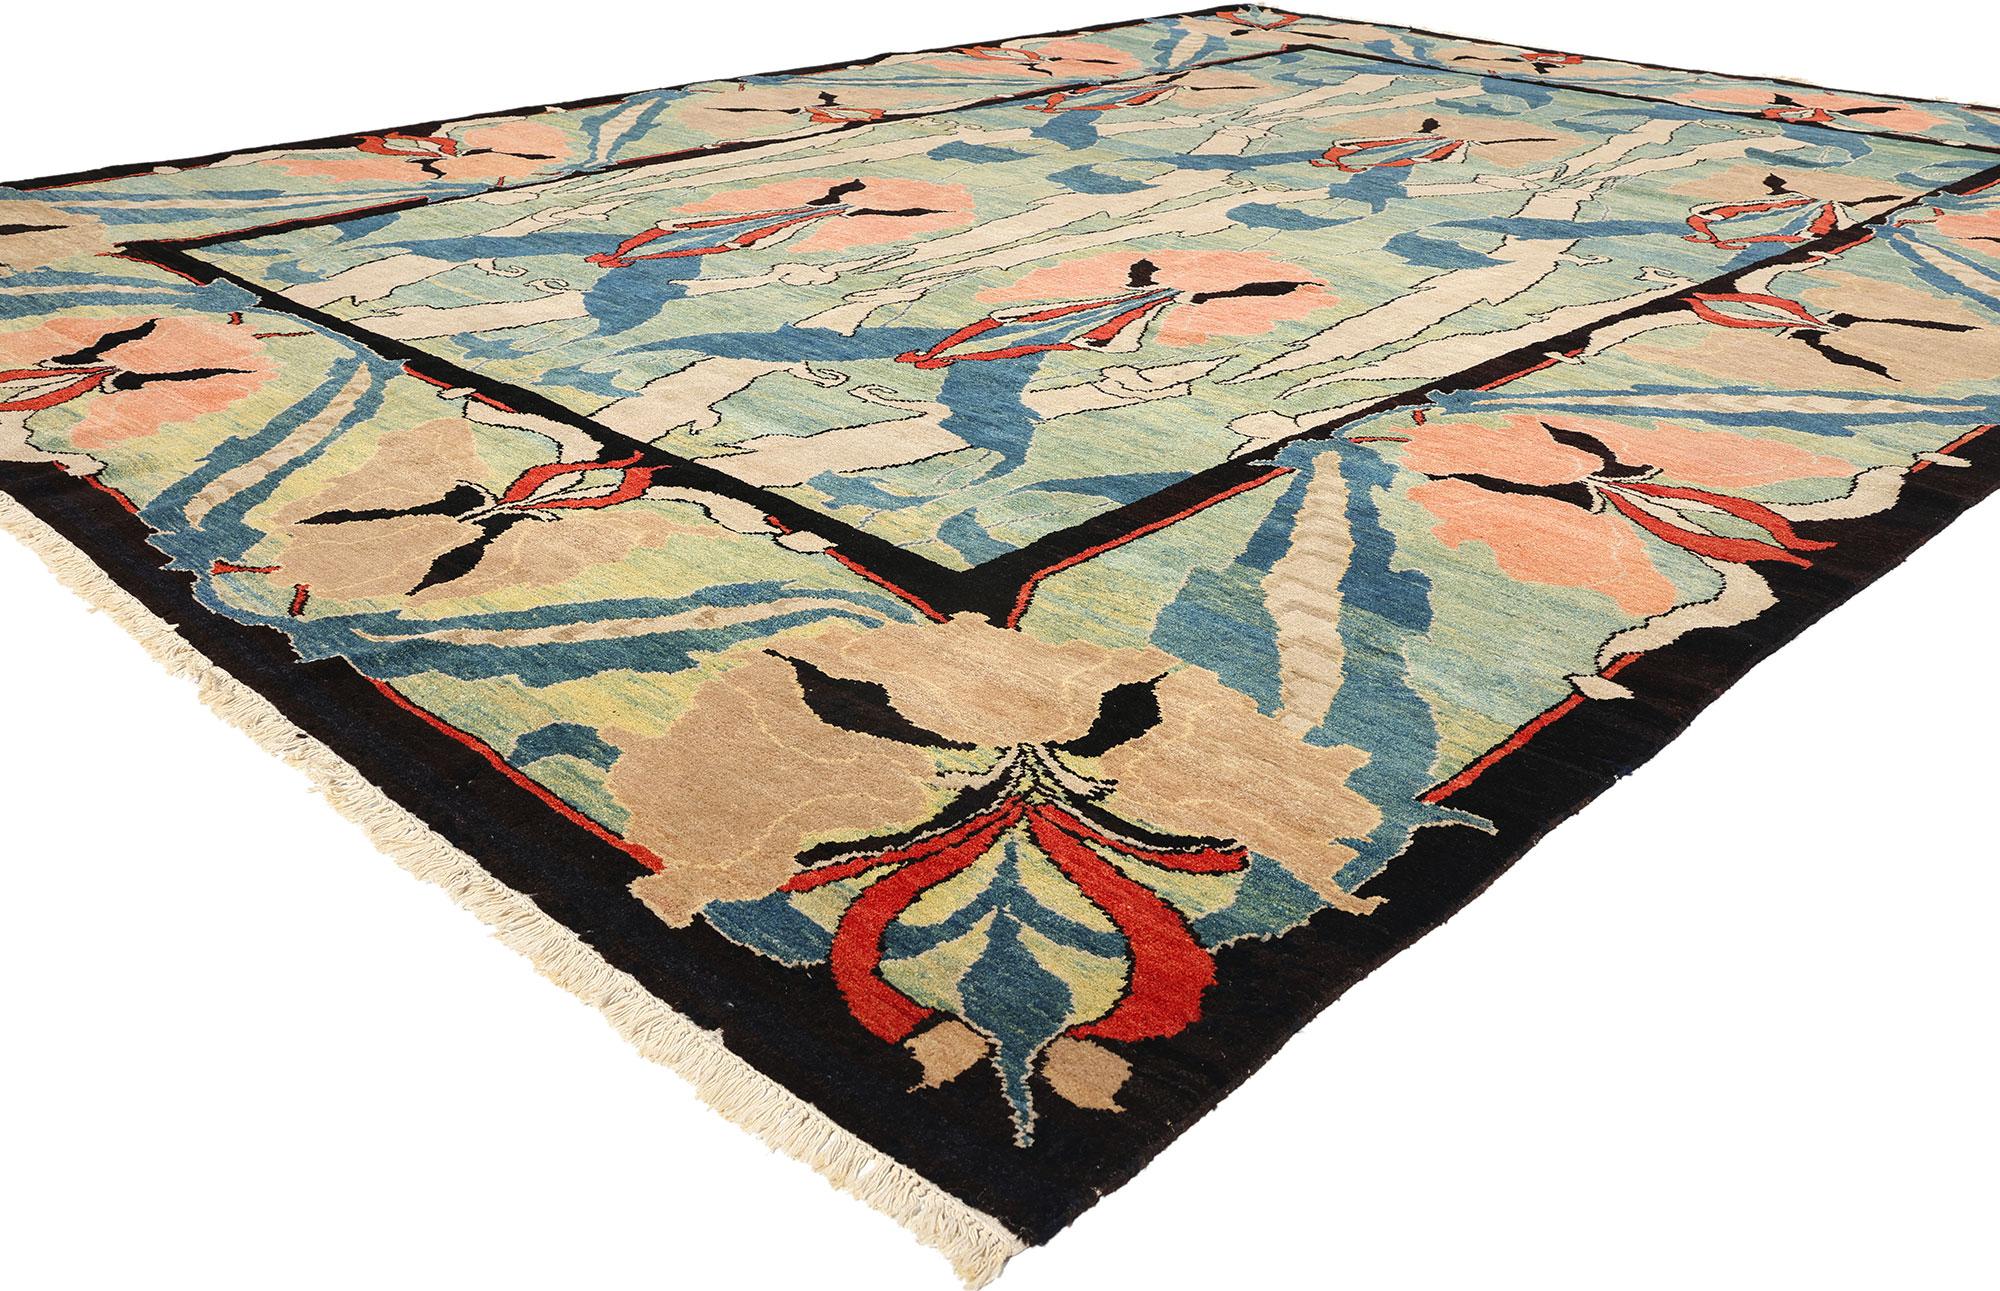 78758 Vintage Irish Donegal Rug Inspired by William Morris, 11'03 x 15'03. Irish Donegal rugs, originating from County Donegal, Ireland, are celebrated for their thick pile, intricate designs, and use of locally sourced wool from the rugged